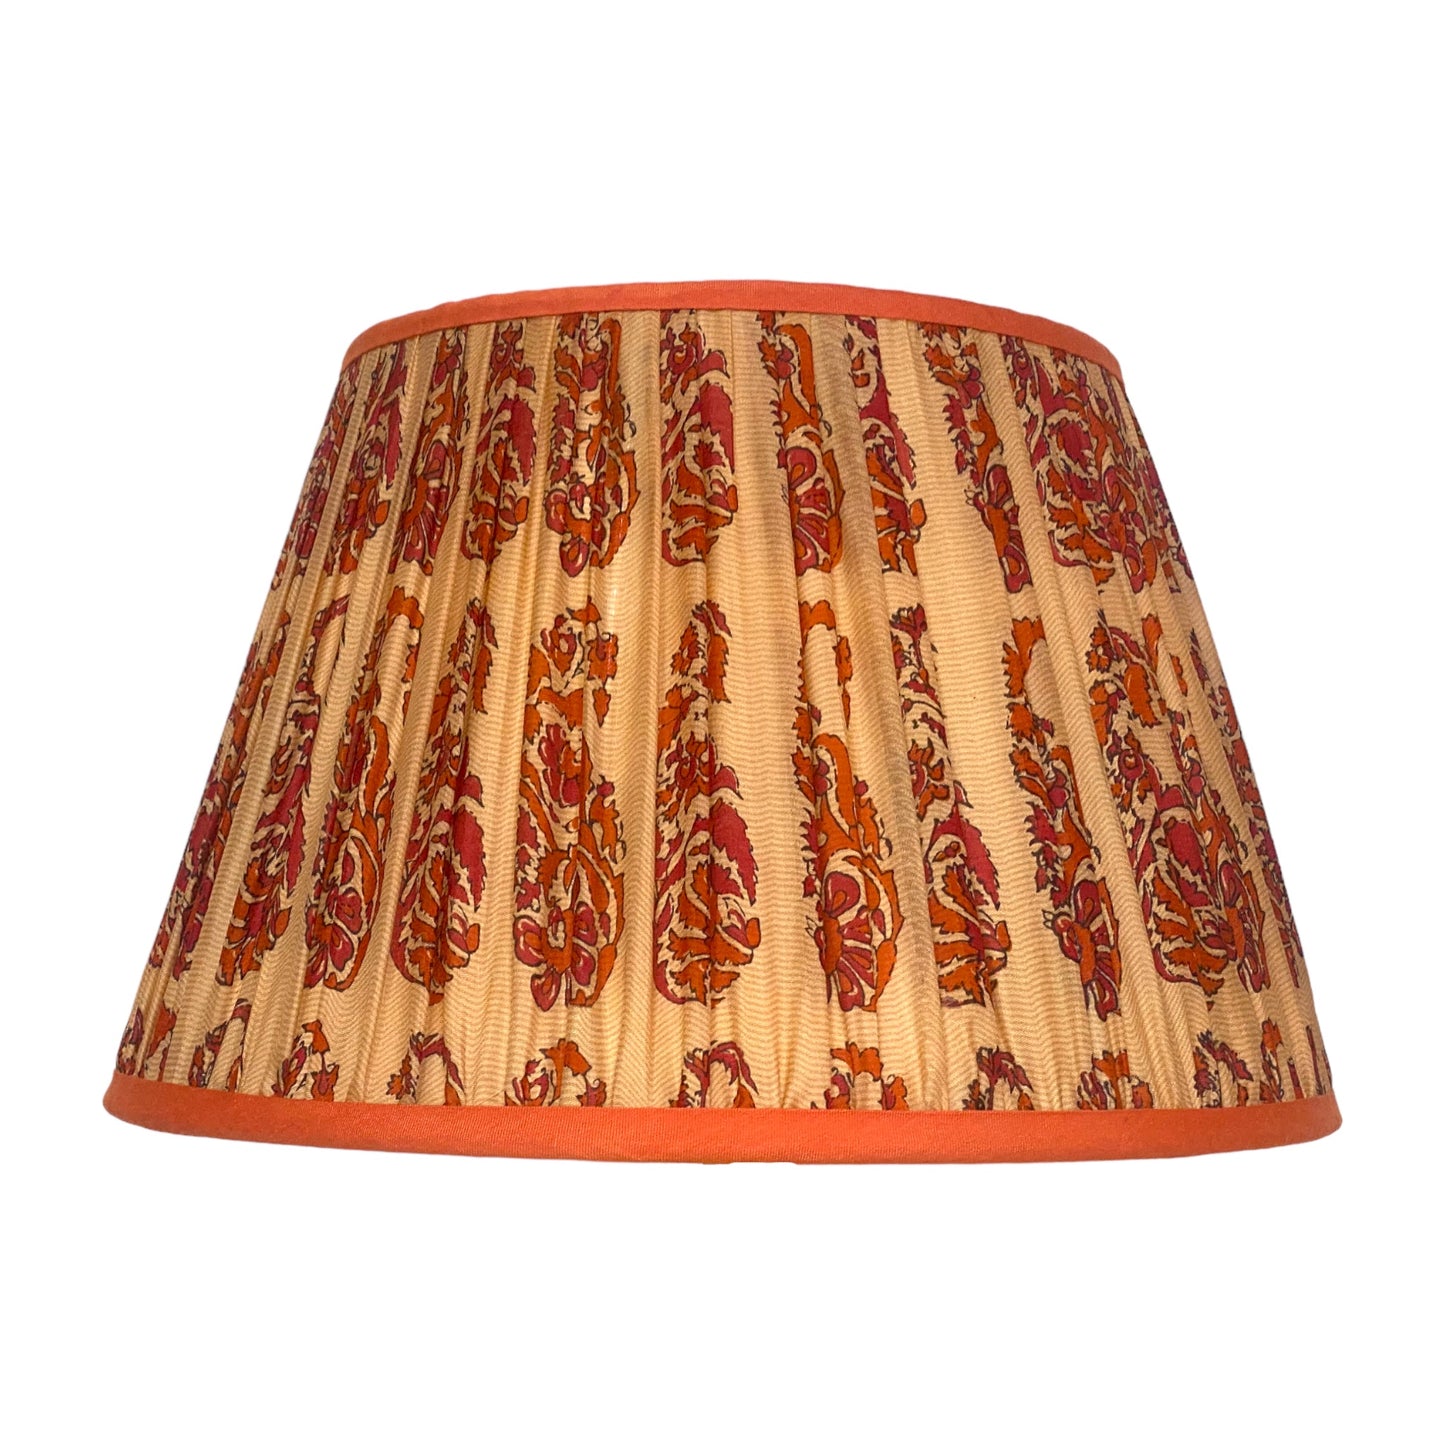 Red and orange vintage 35cm lampshade